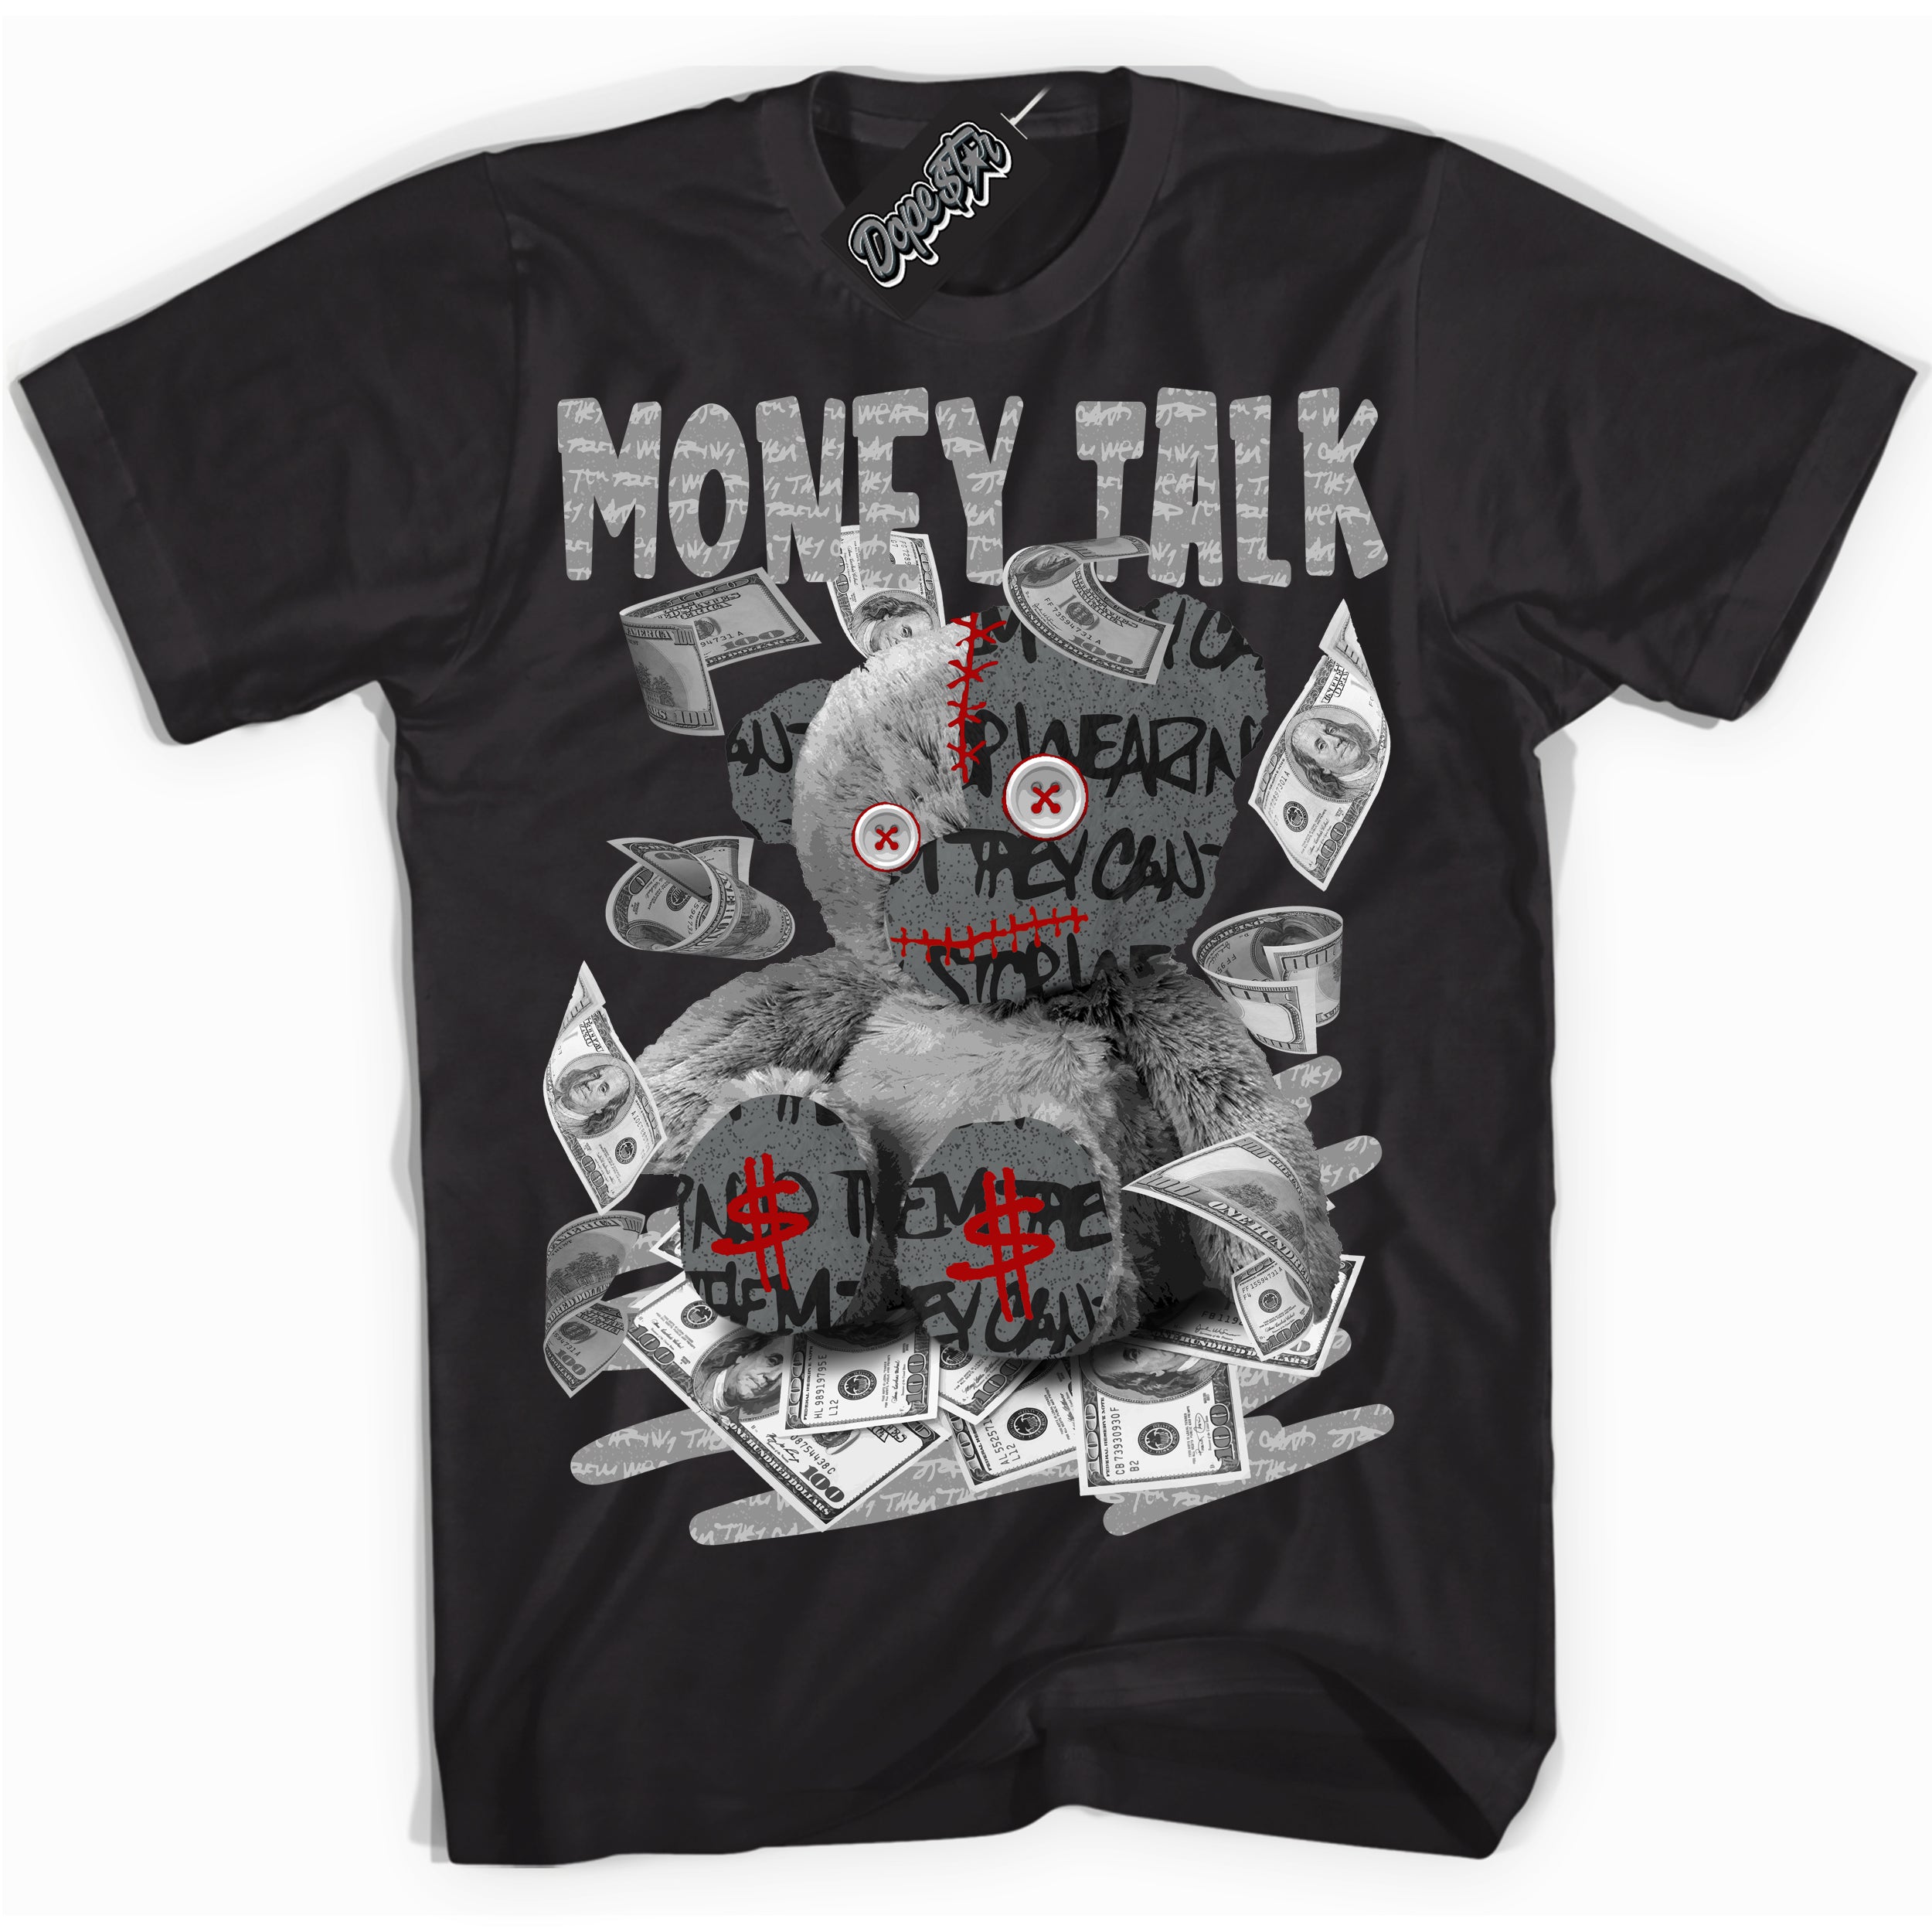 Cool Black Shirt with “ Money Talk Bear ” design that perfectly matches Rebellionaire 1s Sneakers.